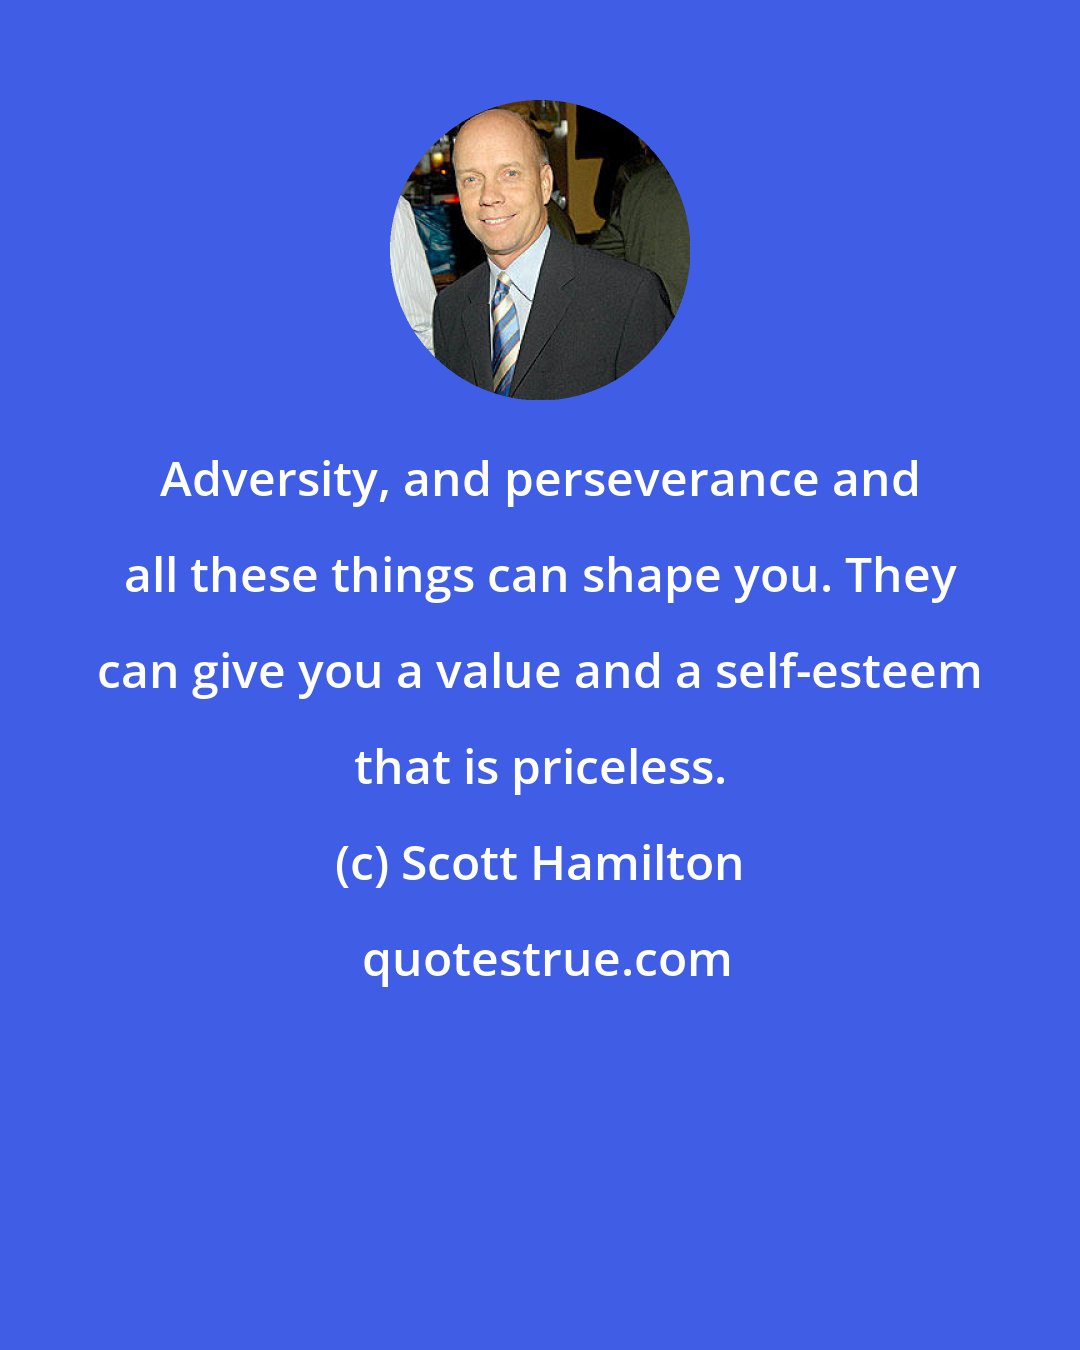 Scott Hamilton: Adversity, and perseverance and all these things can shape you. They can give you a value and a self-esteem that is priceless.